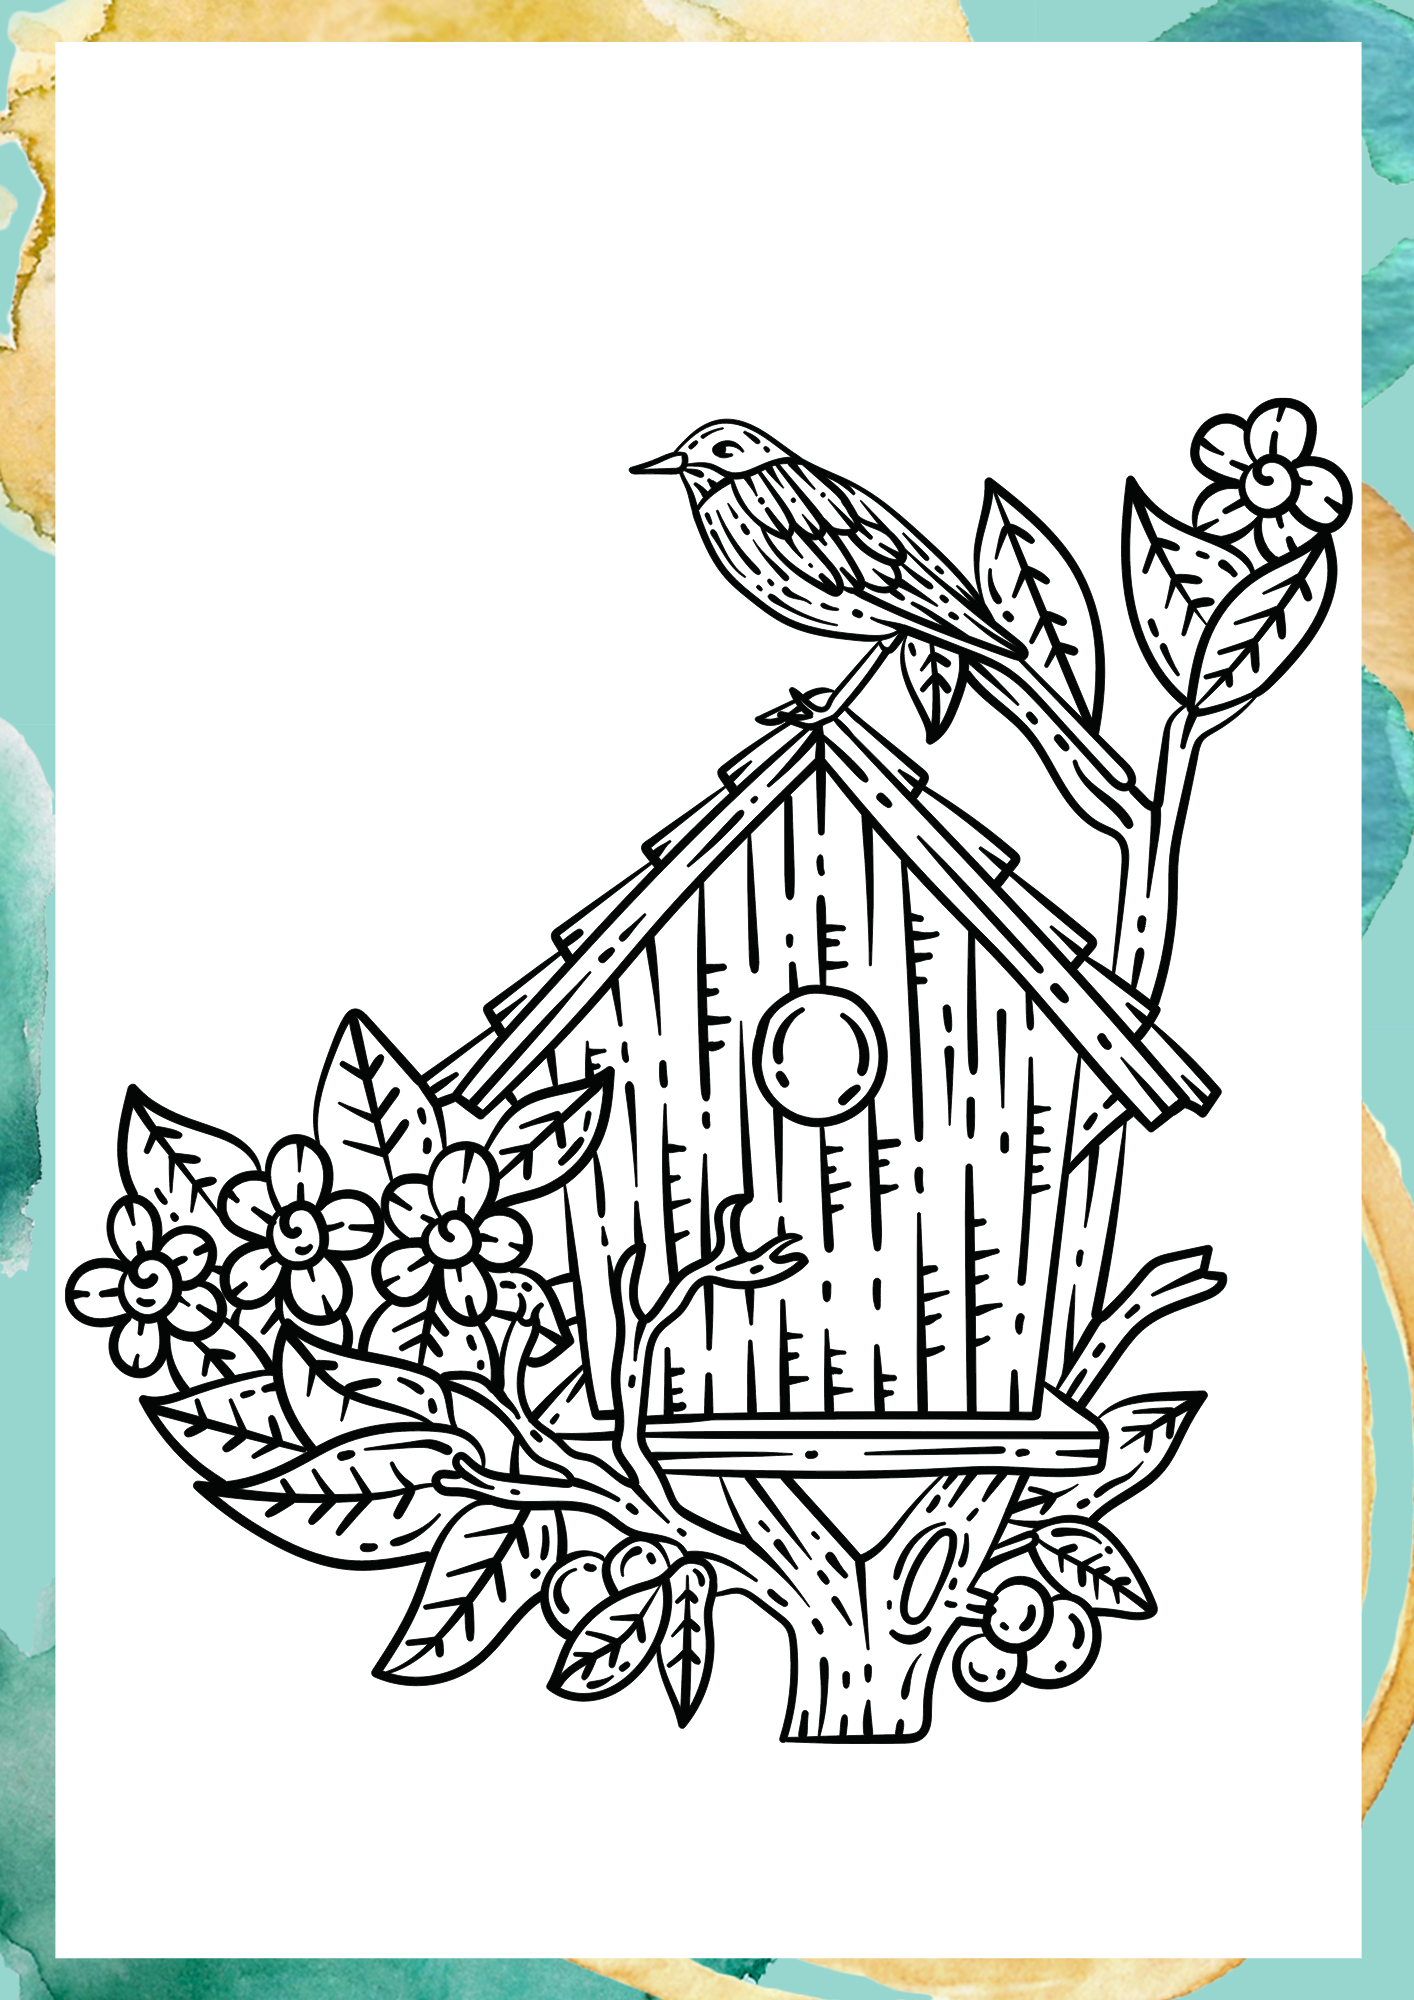 house coloring pages, home coloring pages, coloring page, coloring page for toddlers, Coloring Page, coloring sheet, happy color, colouring, free coloring pages, coloring pages for kids, printable coloring pages, cute coloring pages, colouring pages, colouring to print, free printable coloring pages, free coloring pages for kids, easy coloring pages, coloring sheets